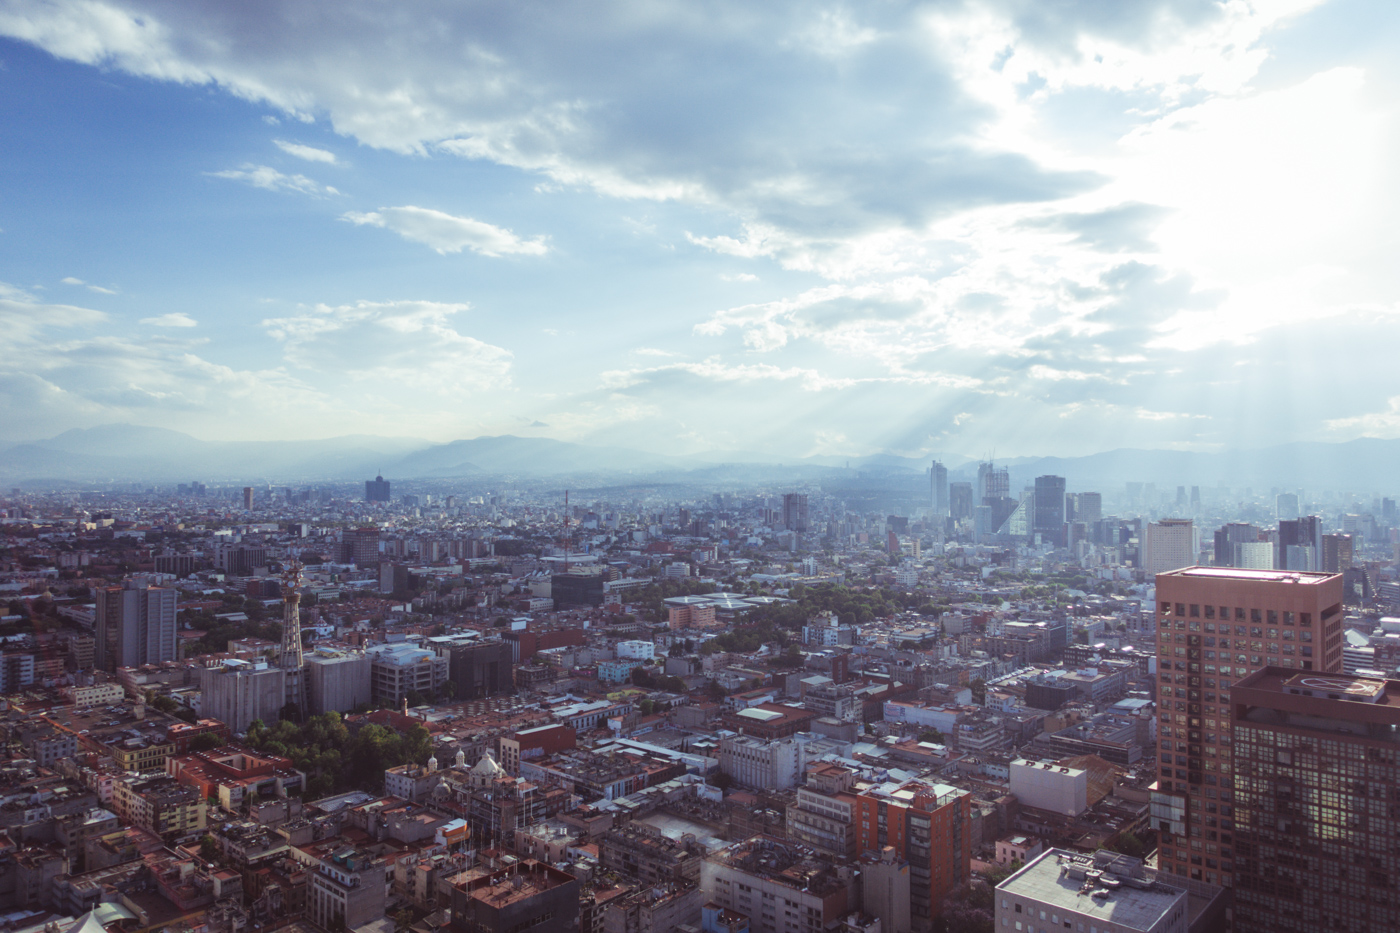 view from Torre Latinoamericana, the fifth tallest tower in Mexico City